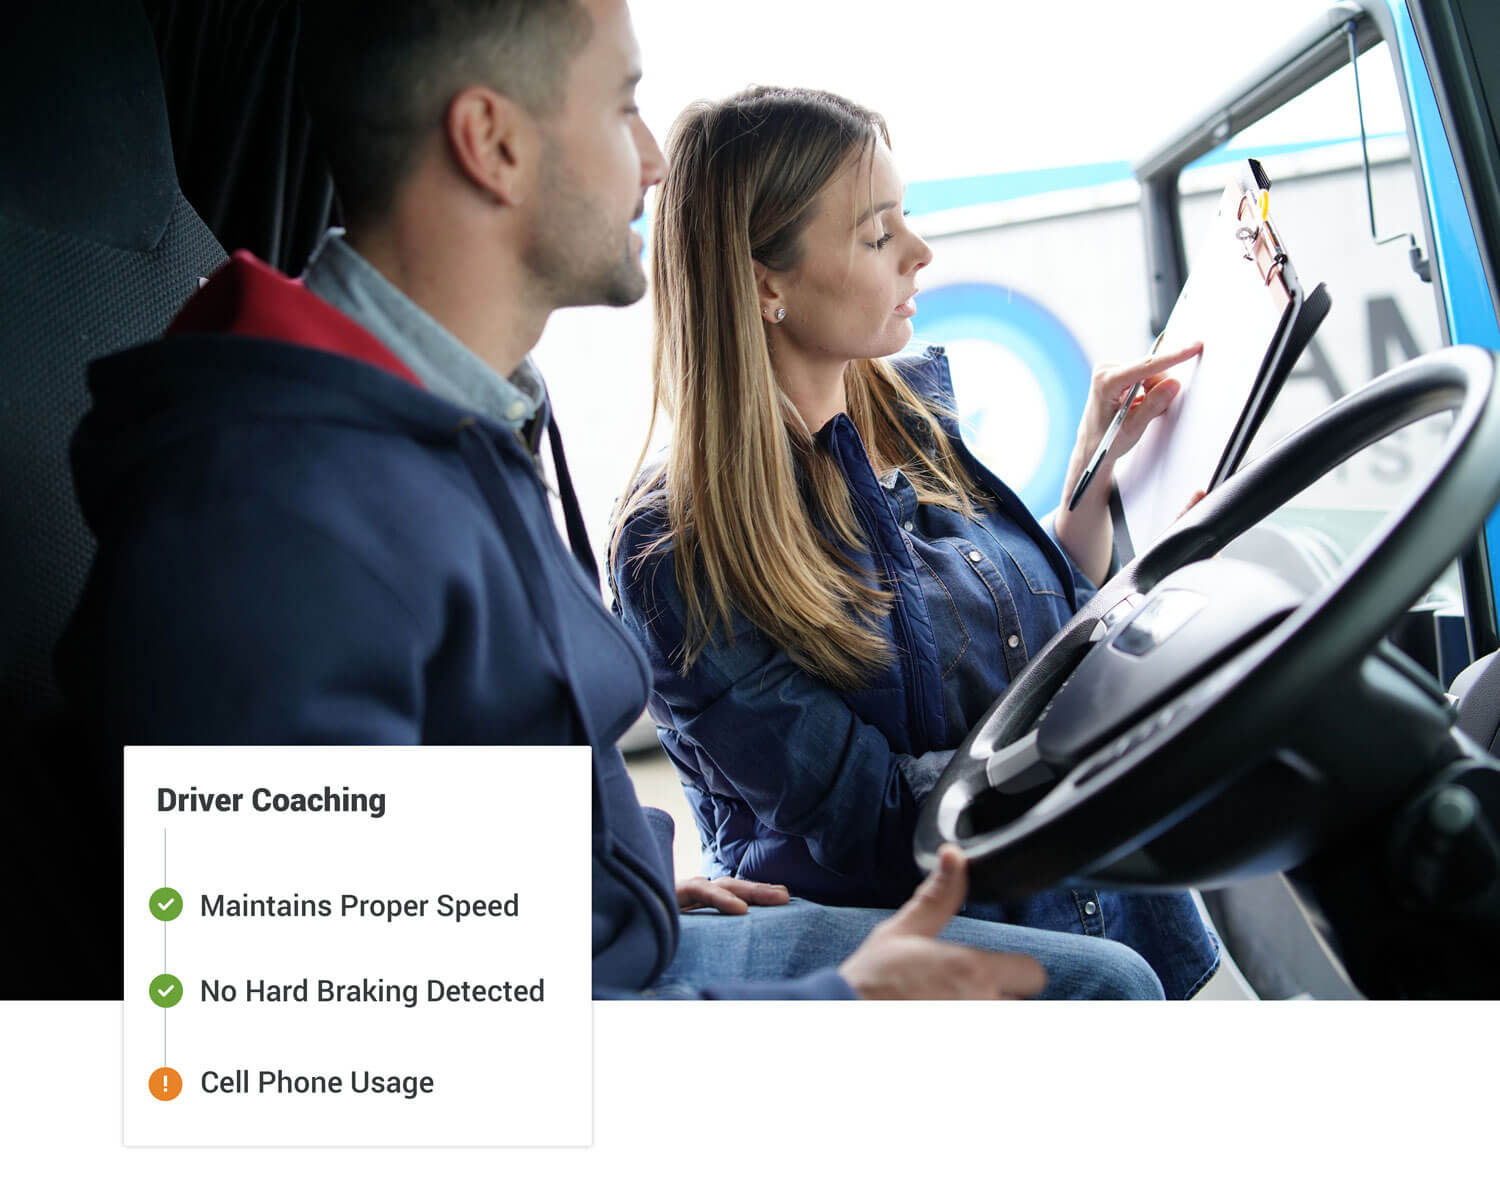 Truck Driver Monitoring & Safety Coaching